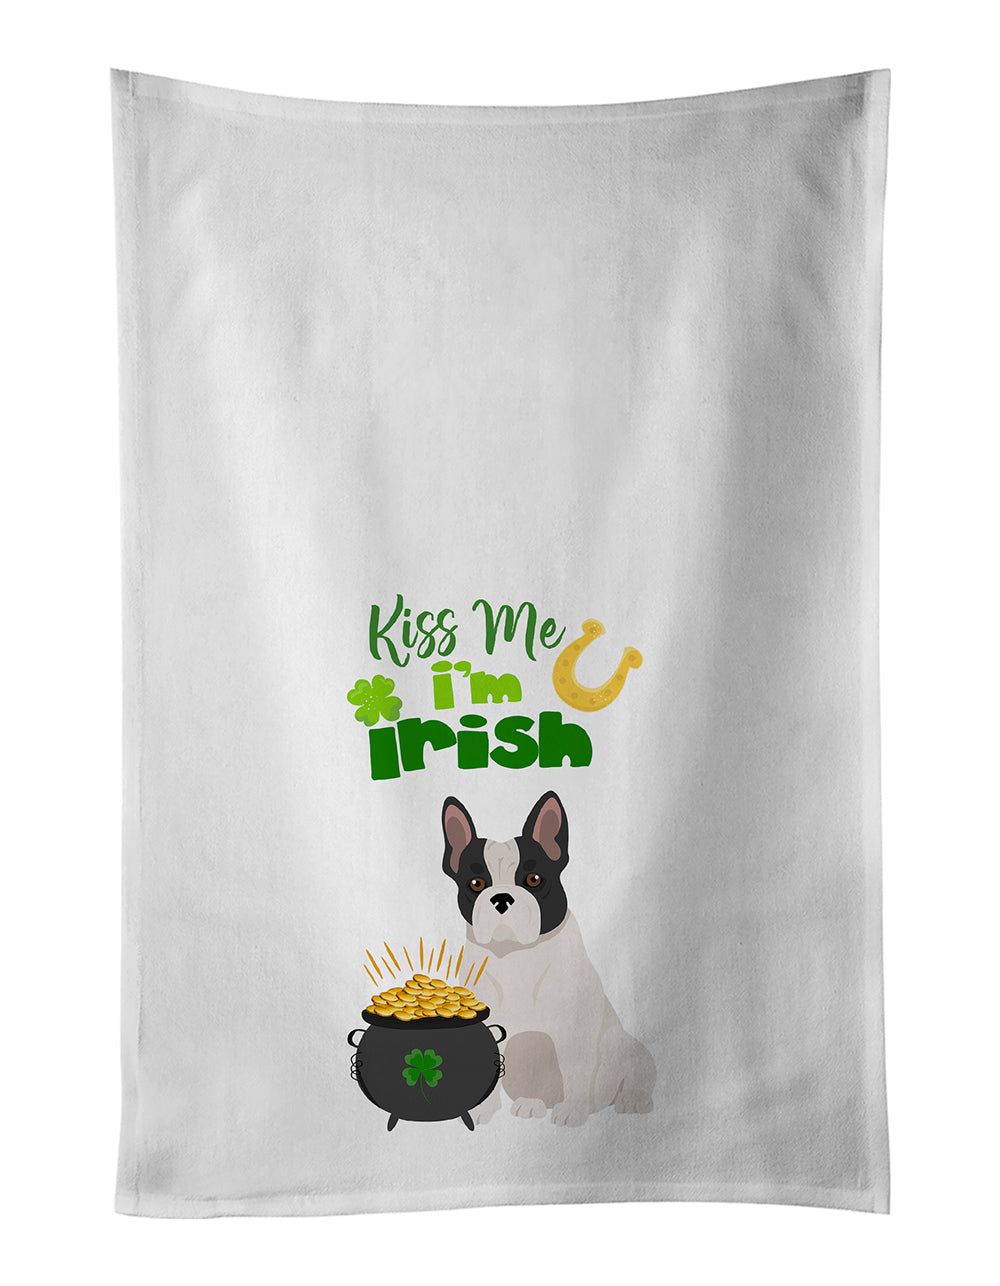 Buy this Black and White French Bulldog St. Patrick's Day White Kitchen Towel Set of 2 Dish Towels